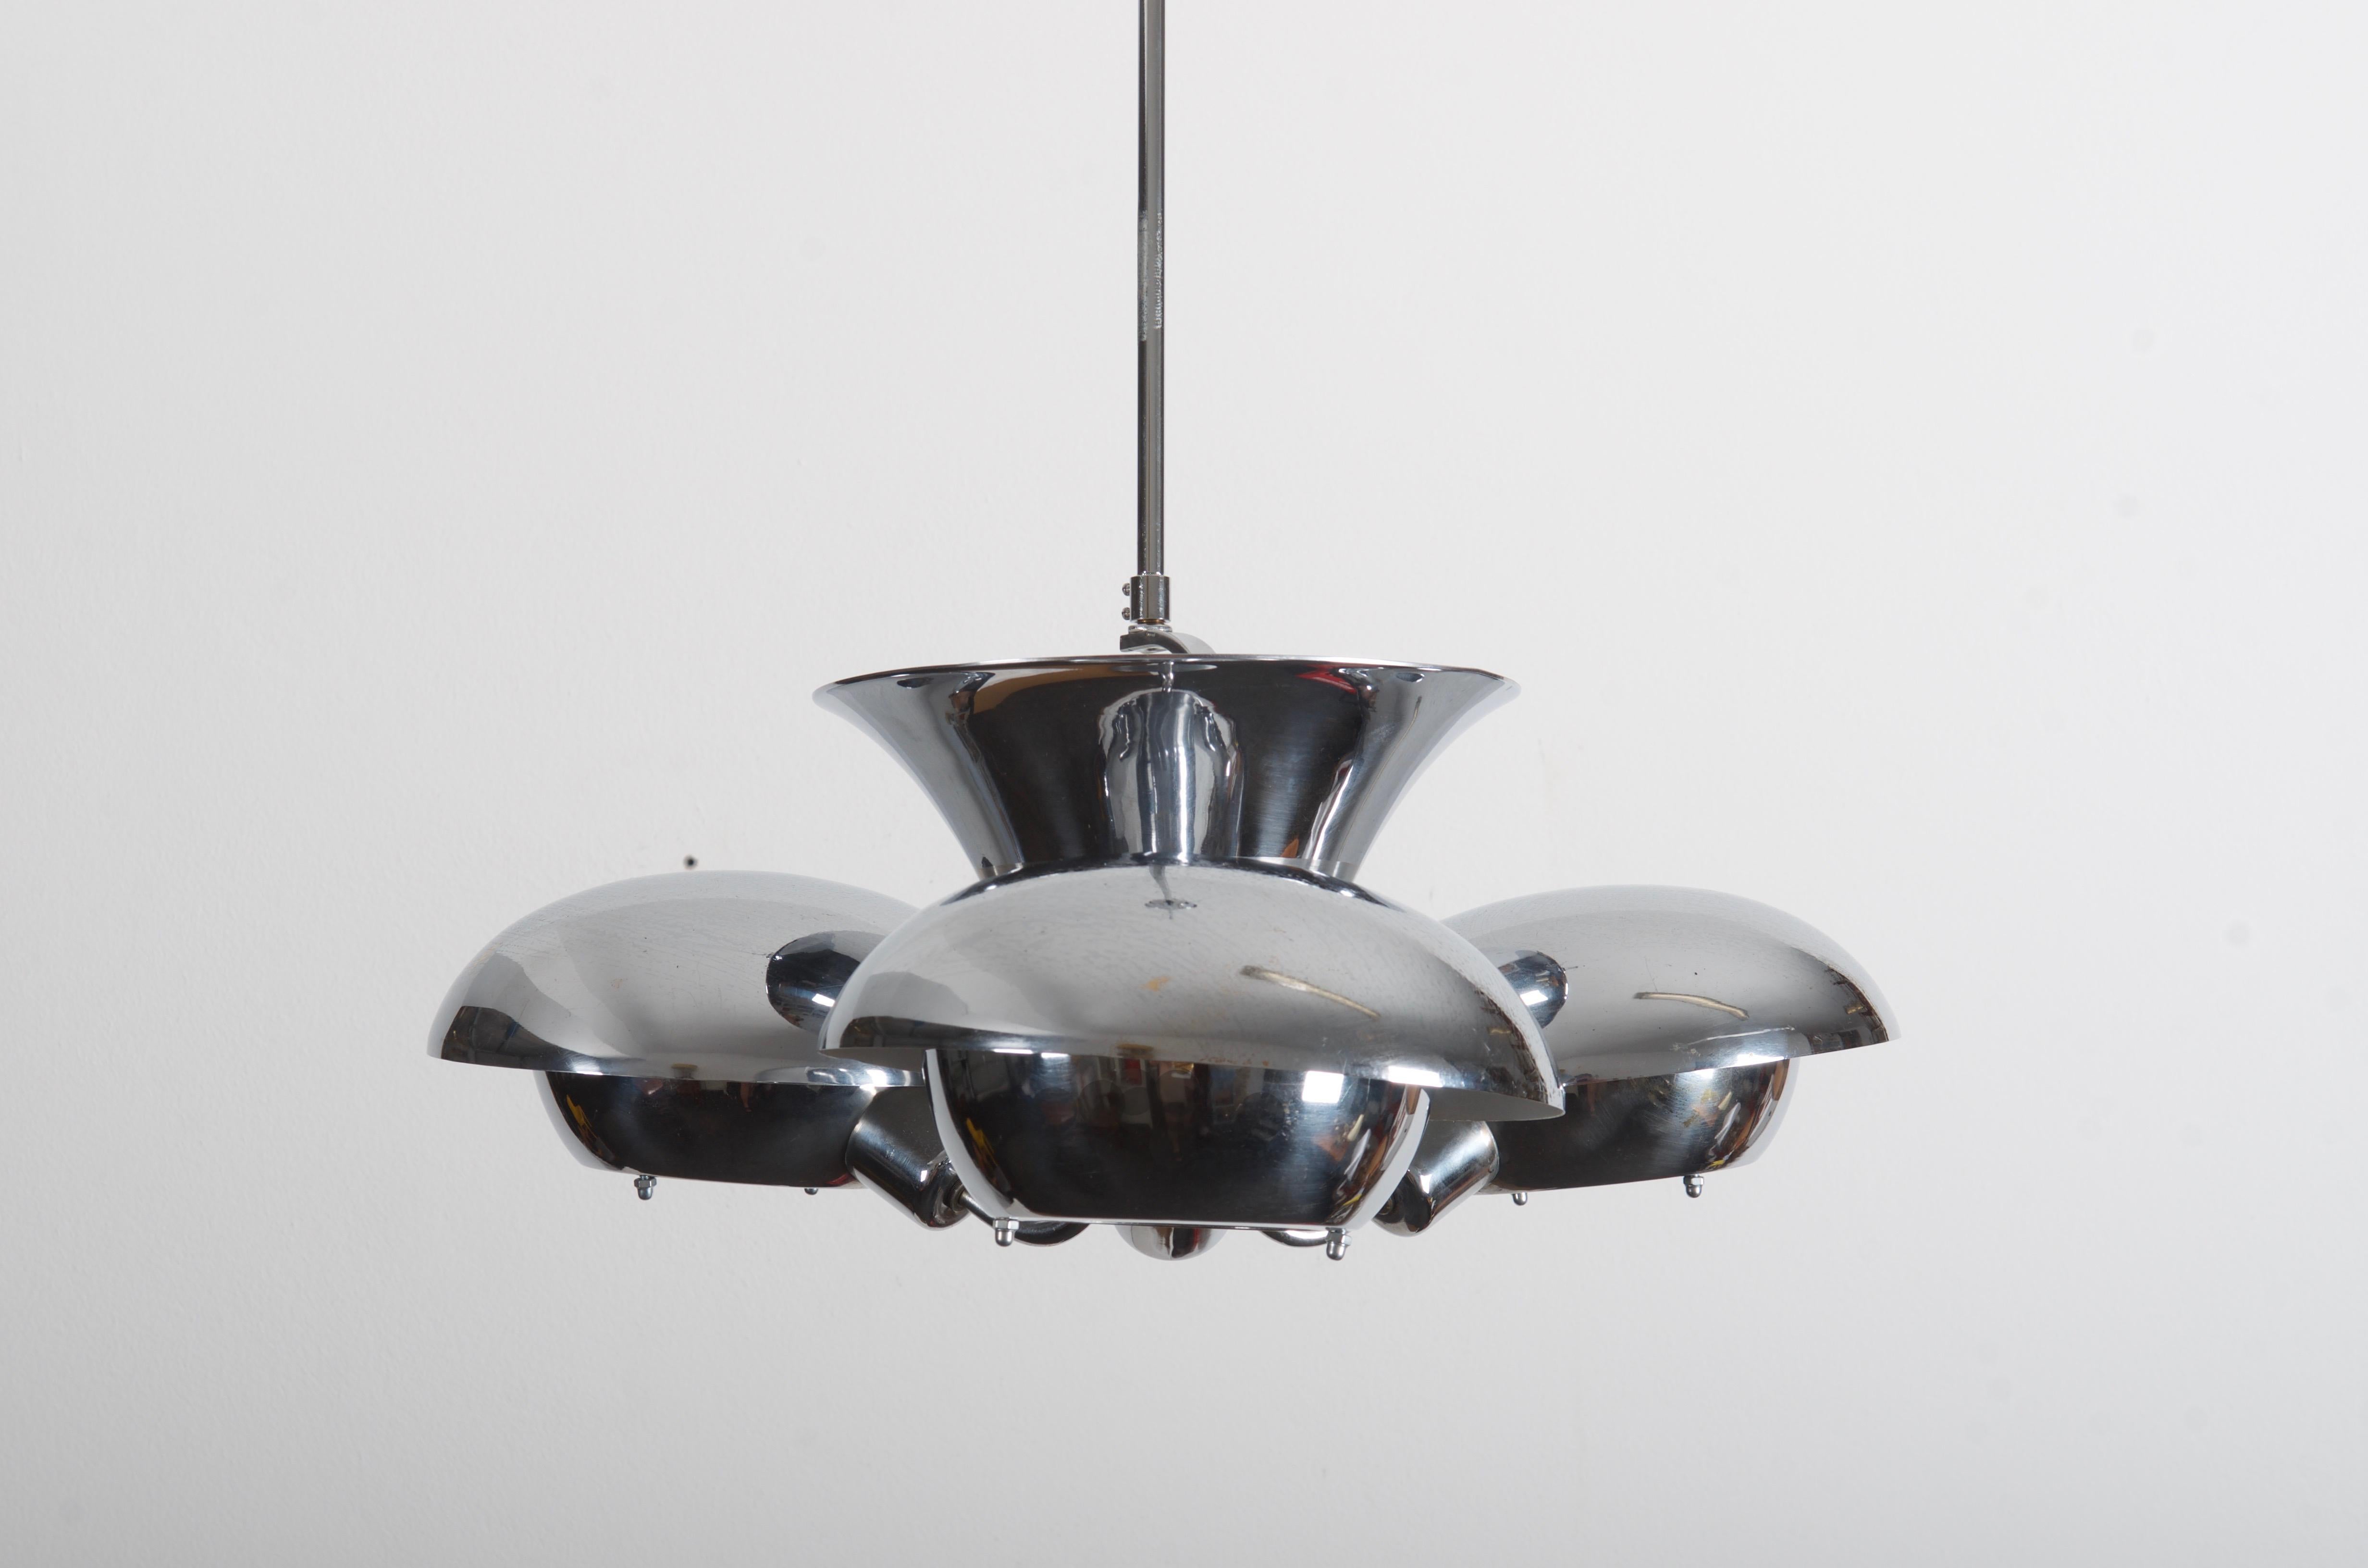 Beautiful Bauhaus design for indirect lighting made in the 1930s by Franta Anýž for Napako.
Steel construction nickel-plated and painted fitted with four E27 sockets.